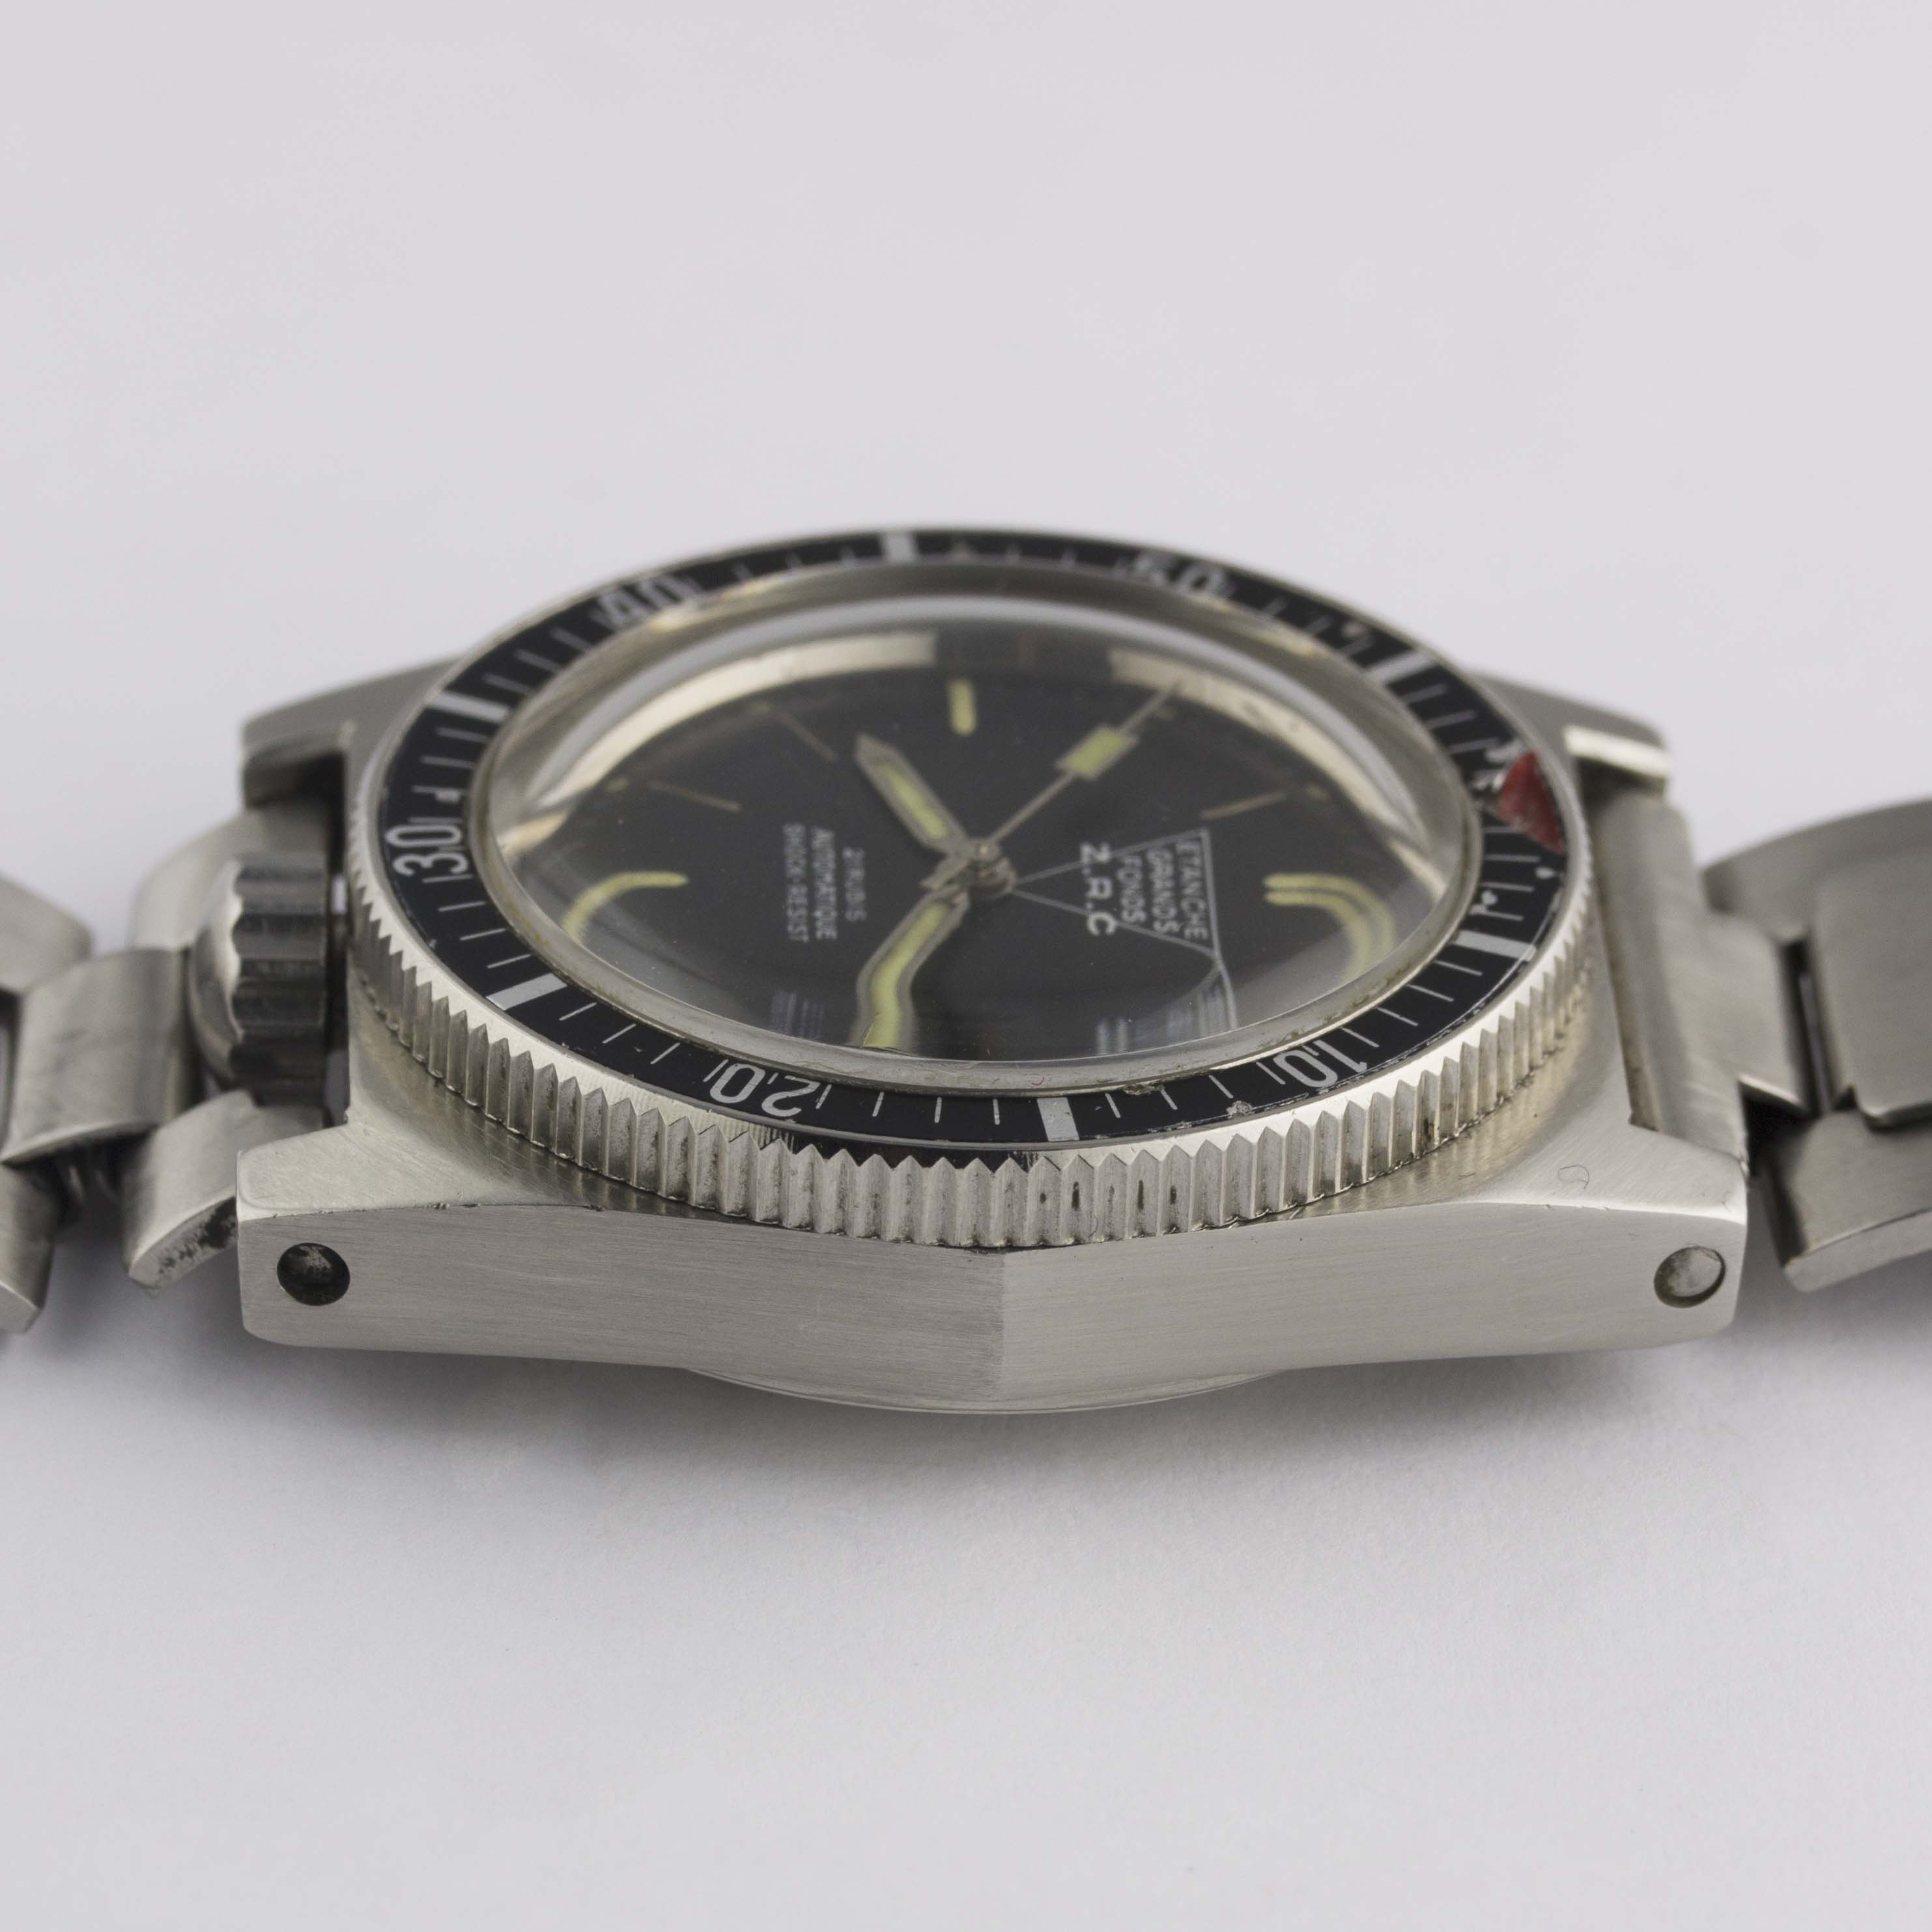 A VERY RARE GENTLEMAN'S STAINLESS STEEL Z.R.C. ETANCHE GRANDS FONDS 300M "SERIES III" AUTOMATIC - Image 10 of 11